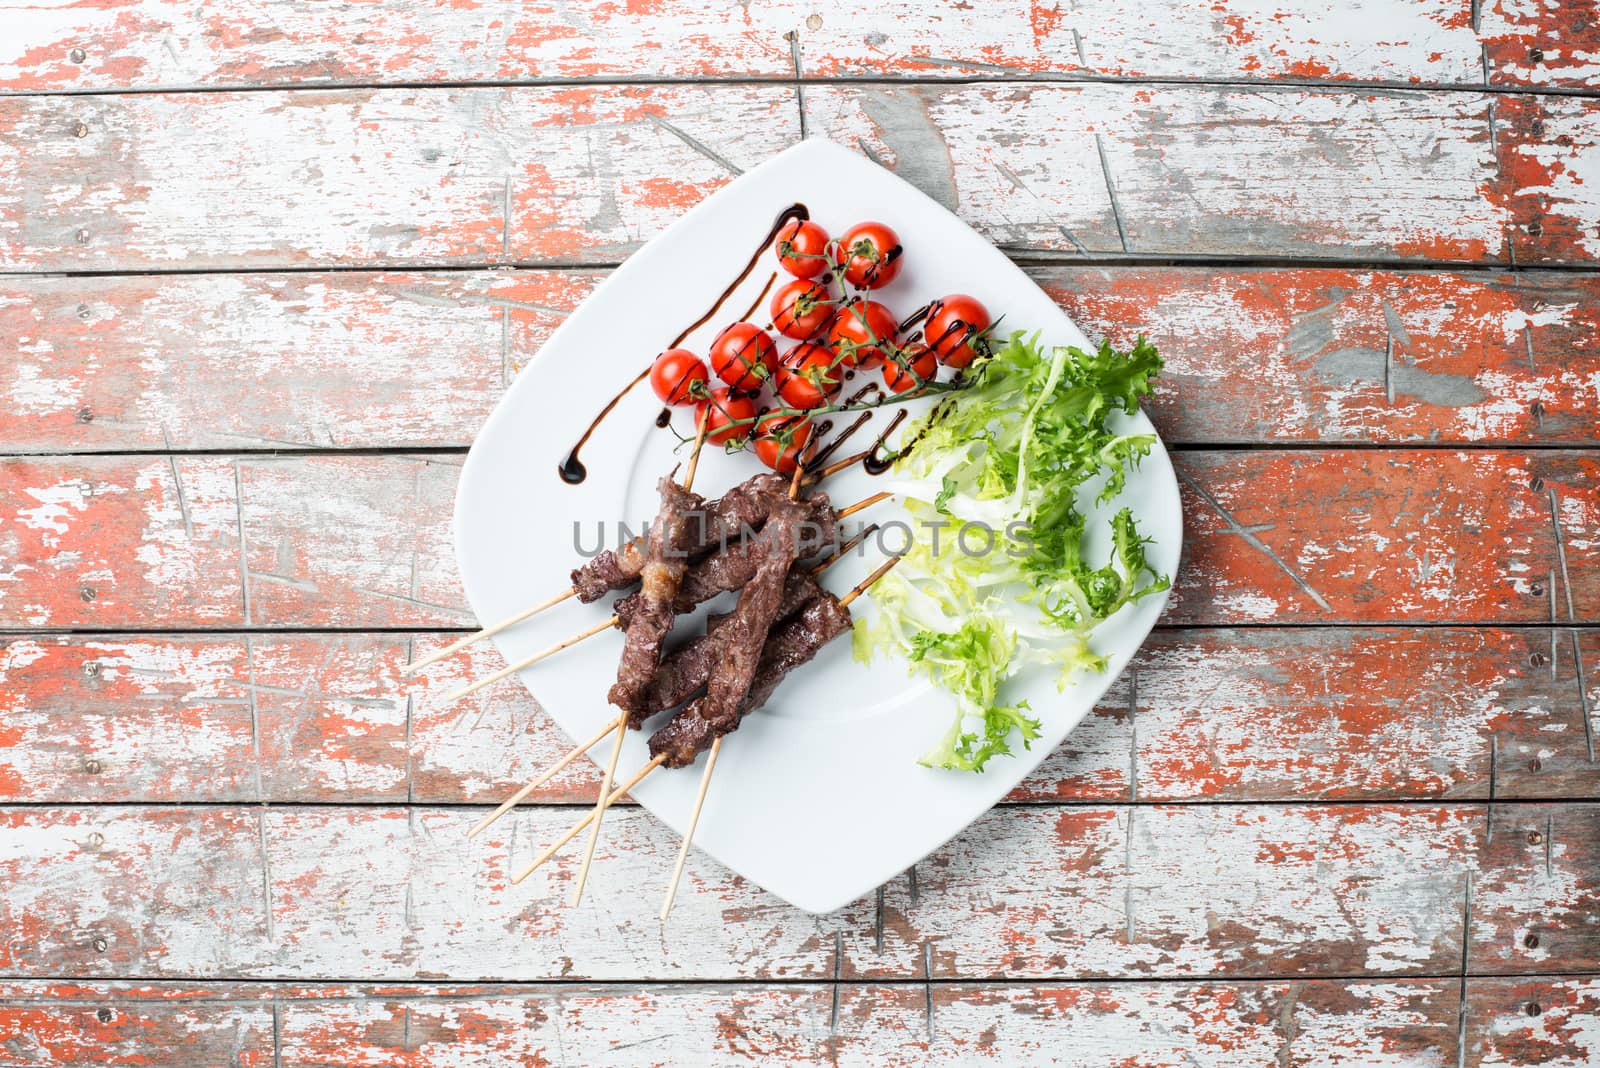 Arrosticini meat in a dish with salad and tomatoes on the table